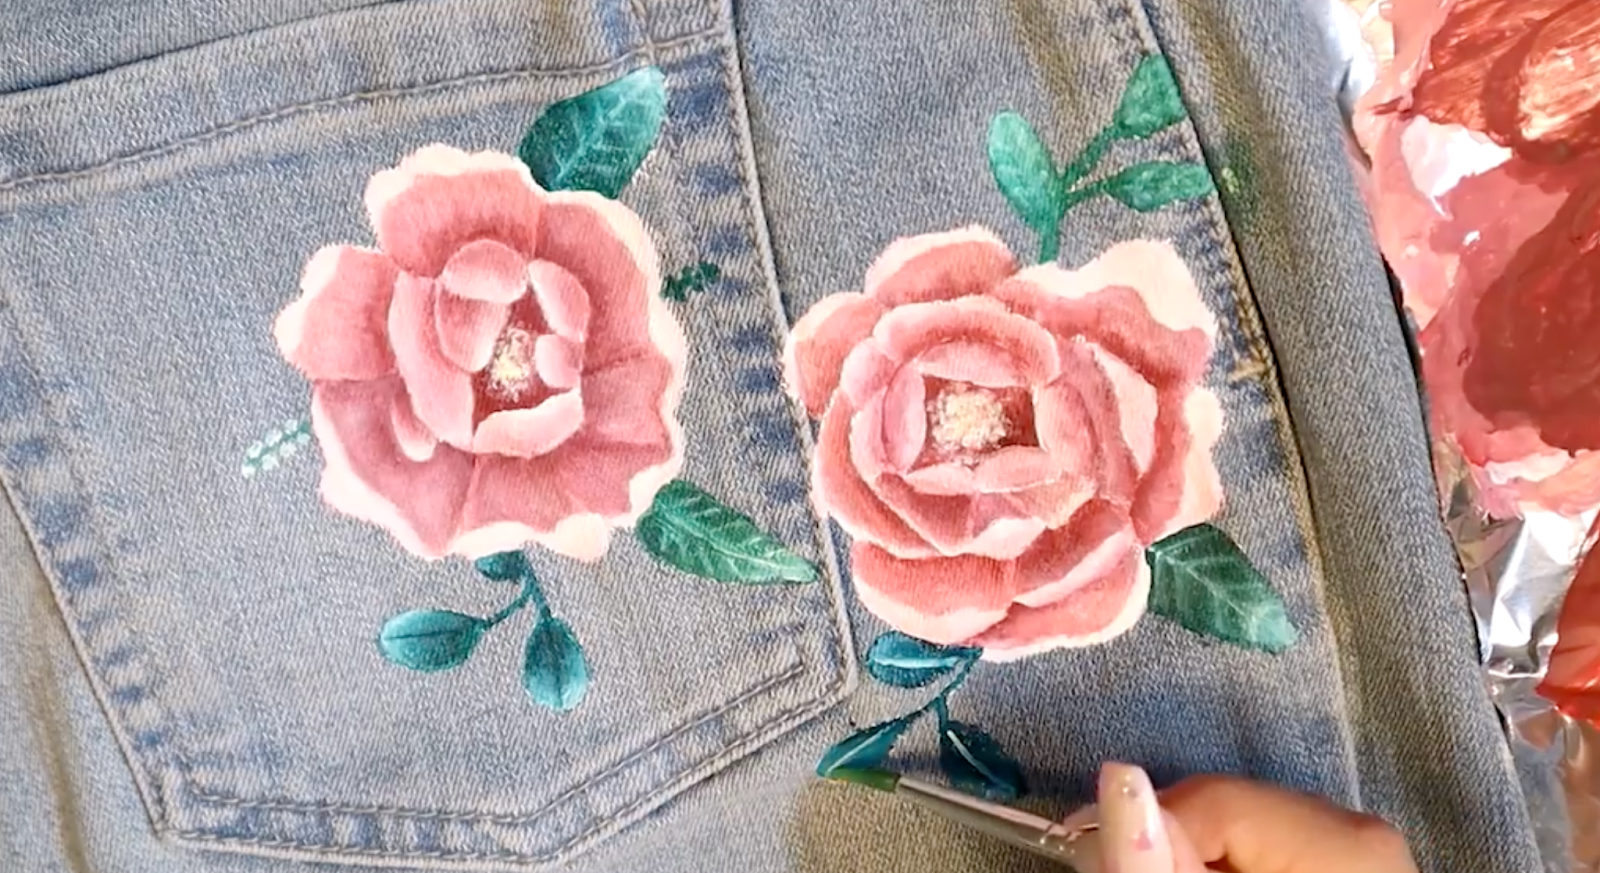 painted jeans